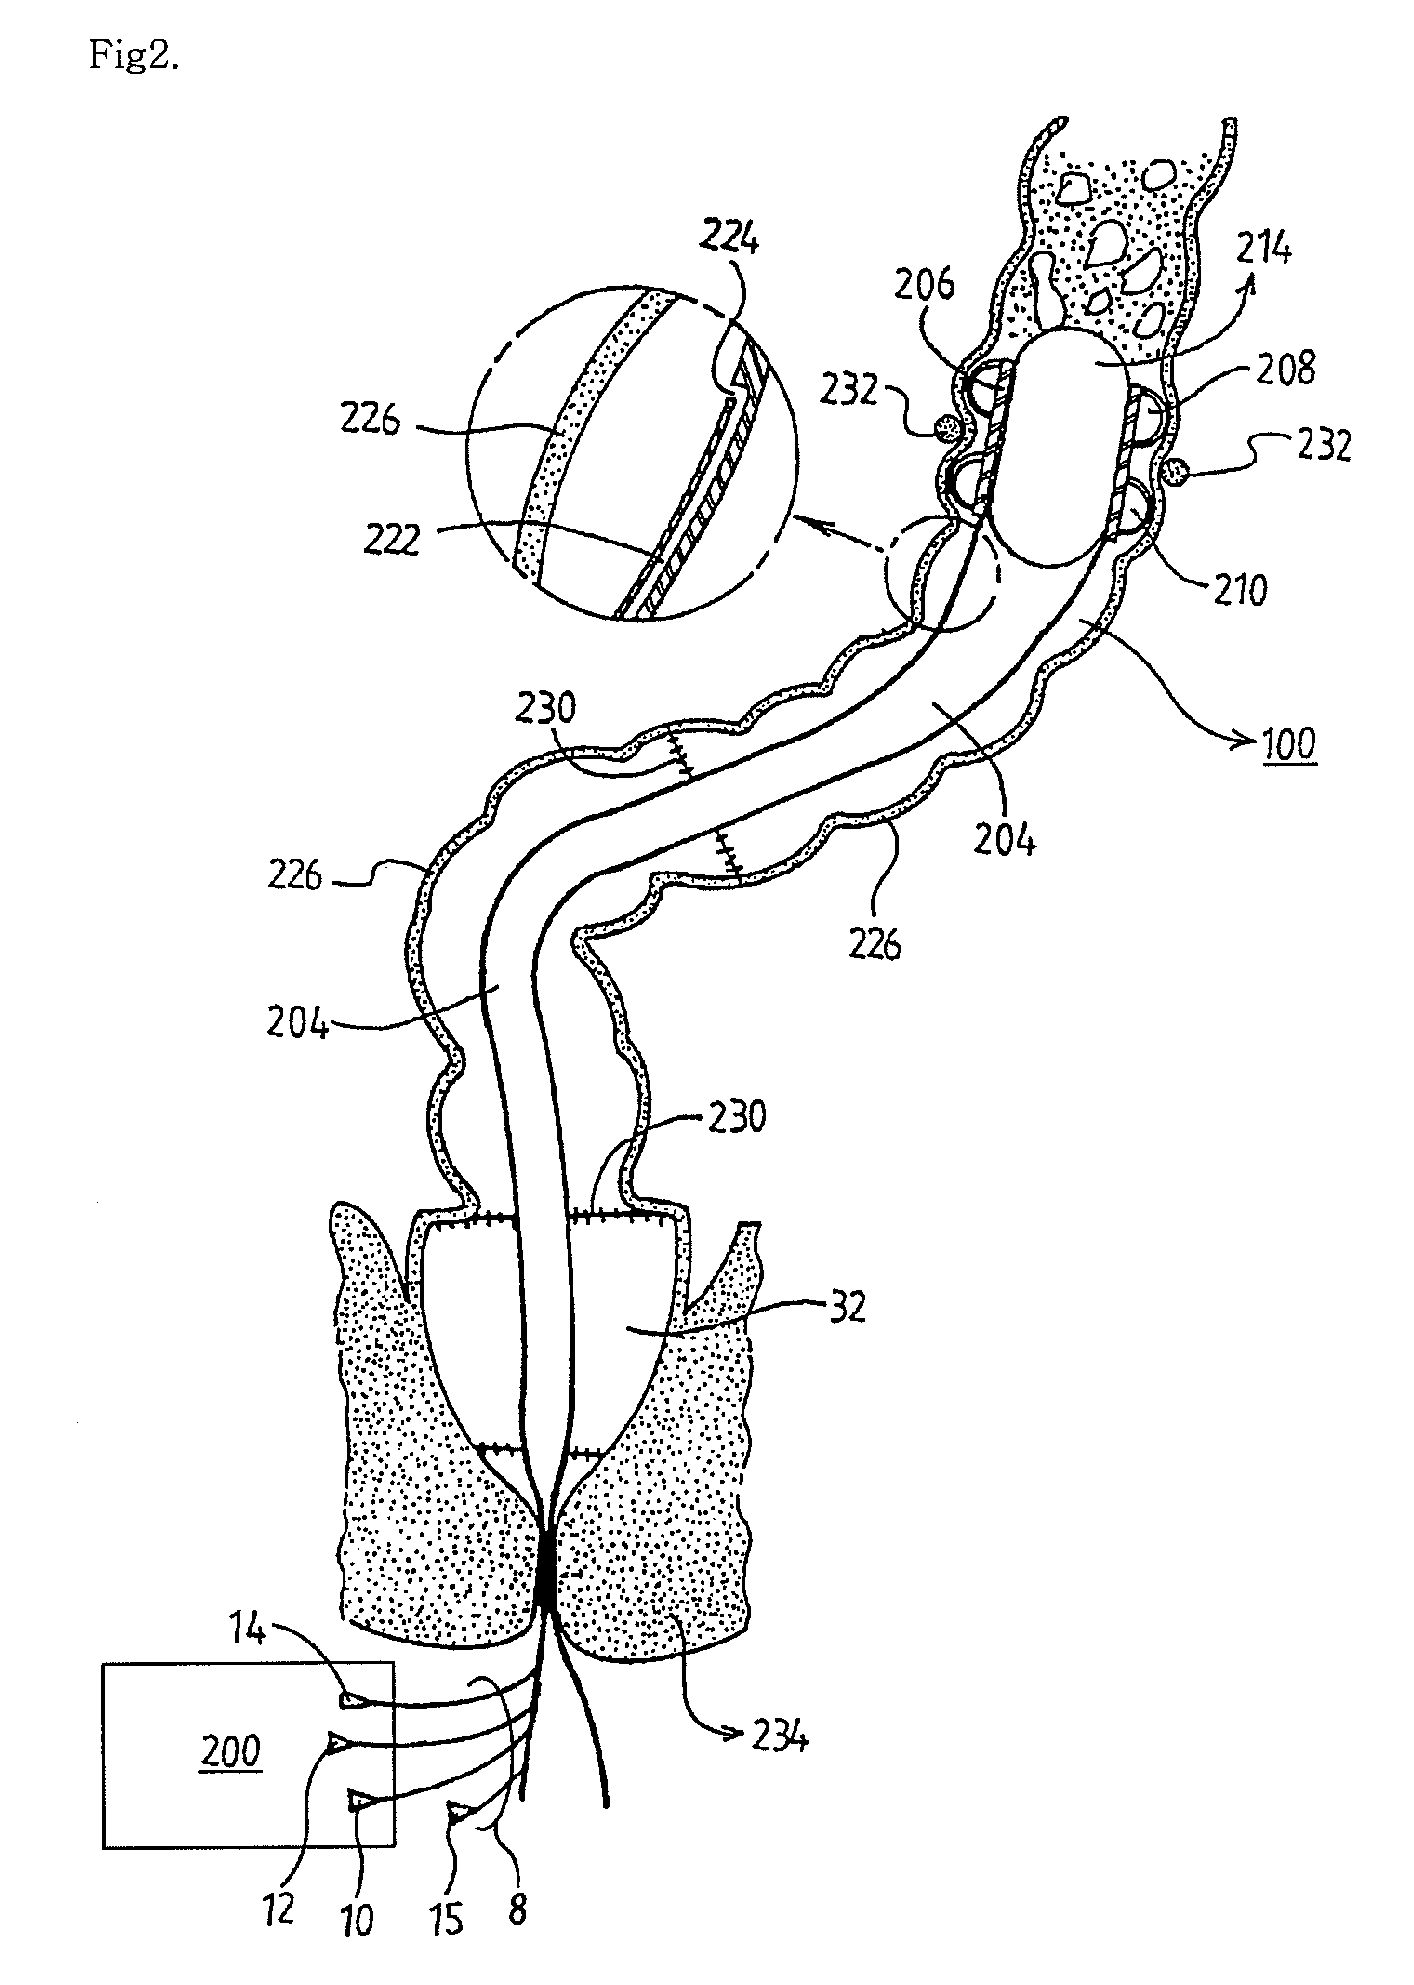 Apparatus and method for controlling fecal diverting device